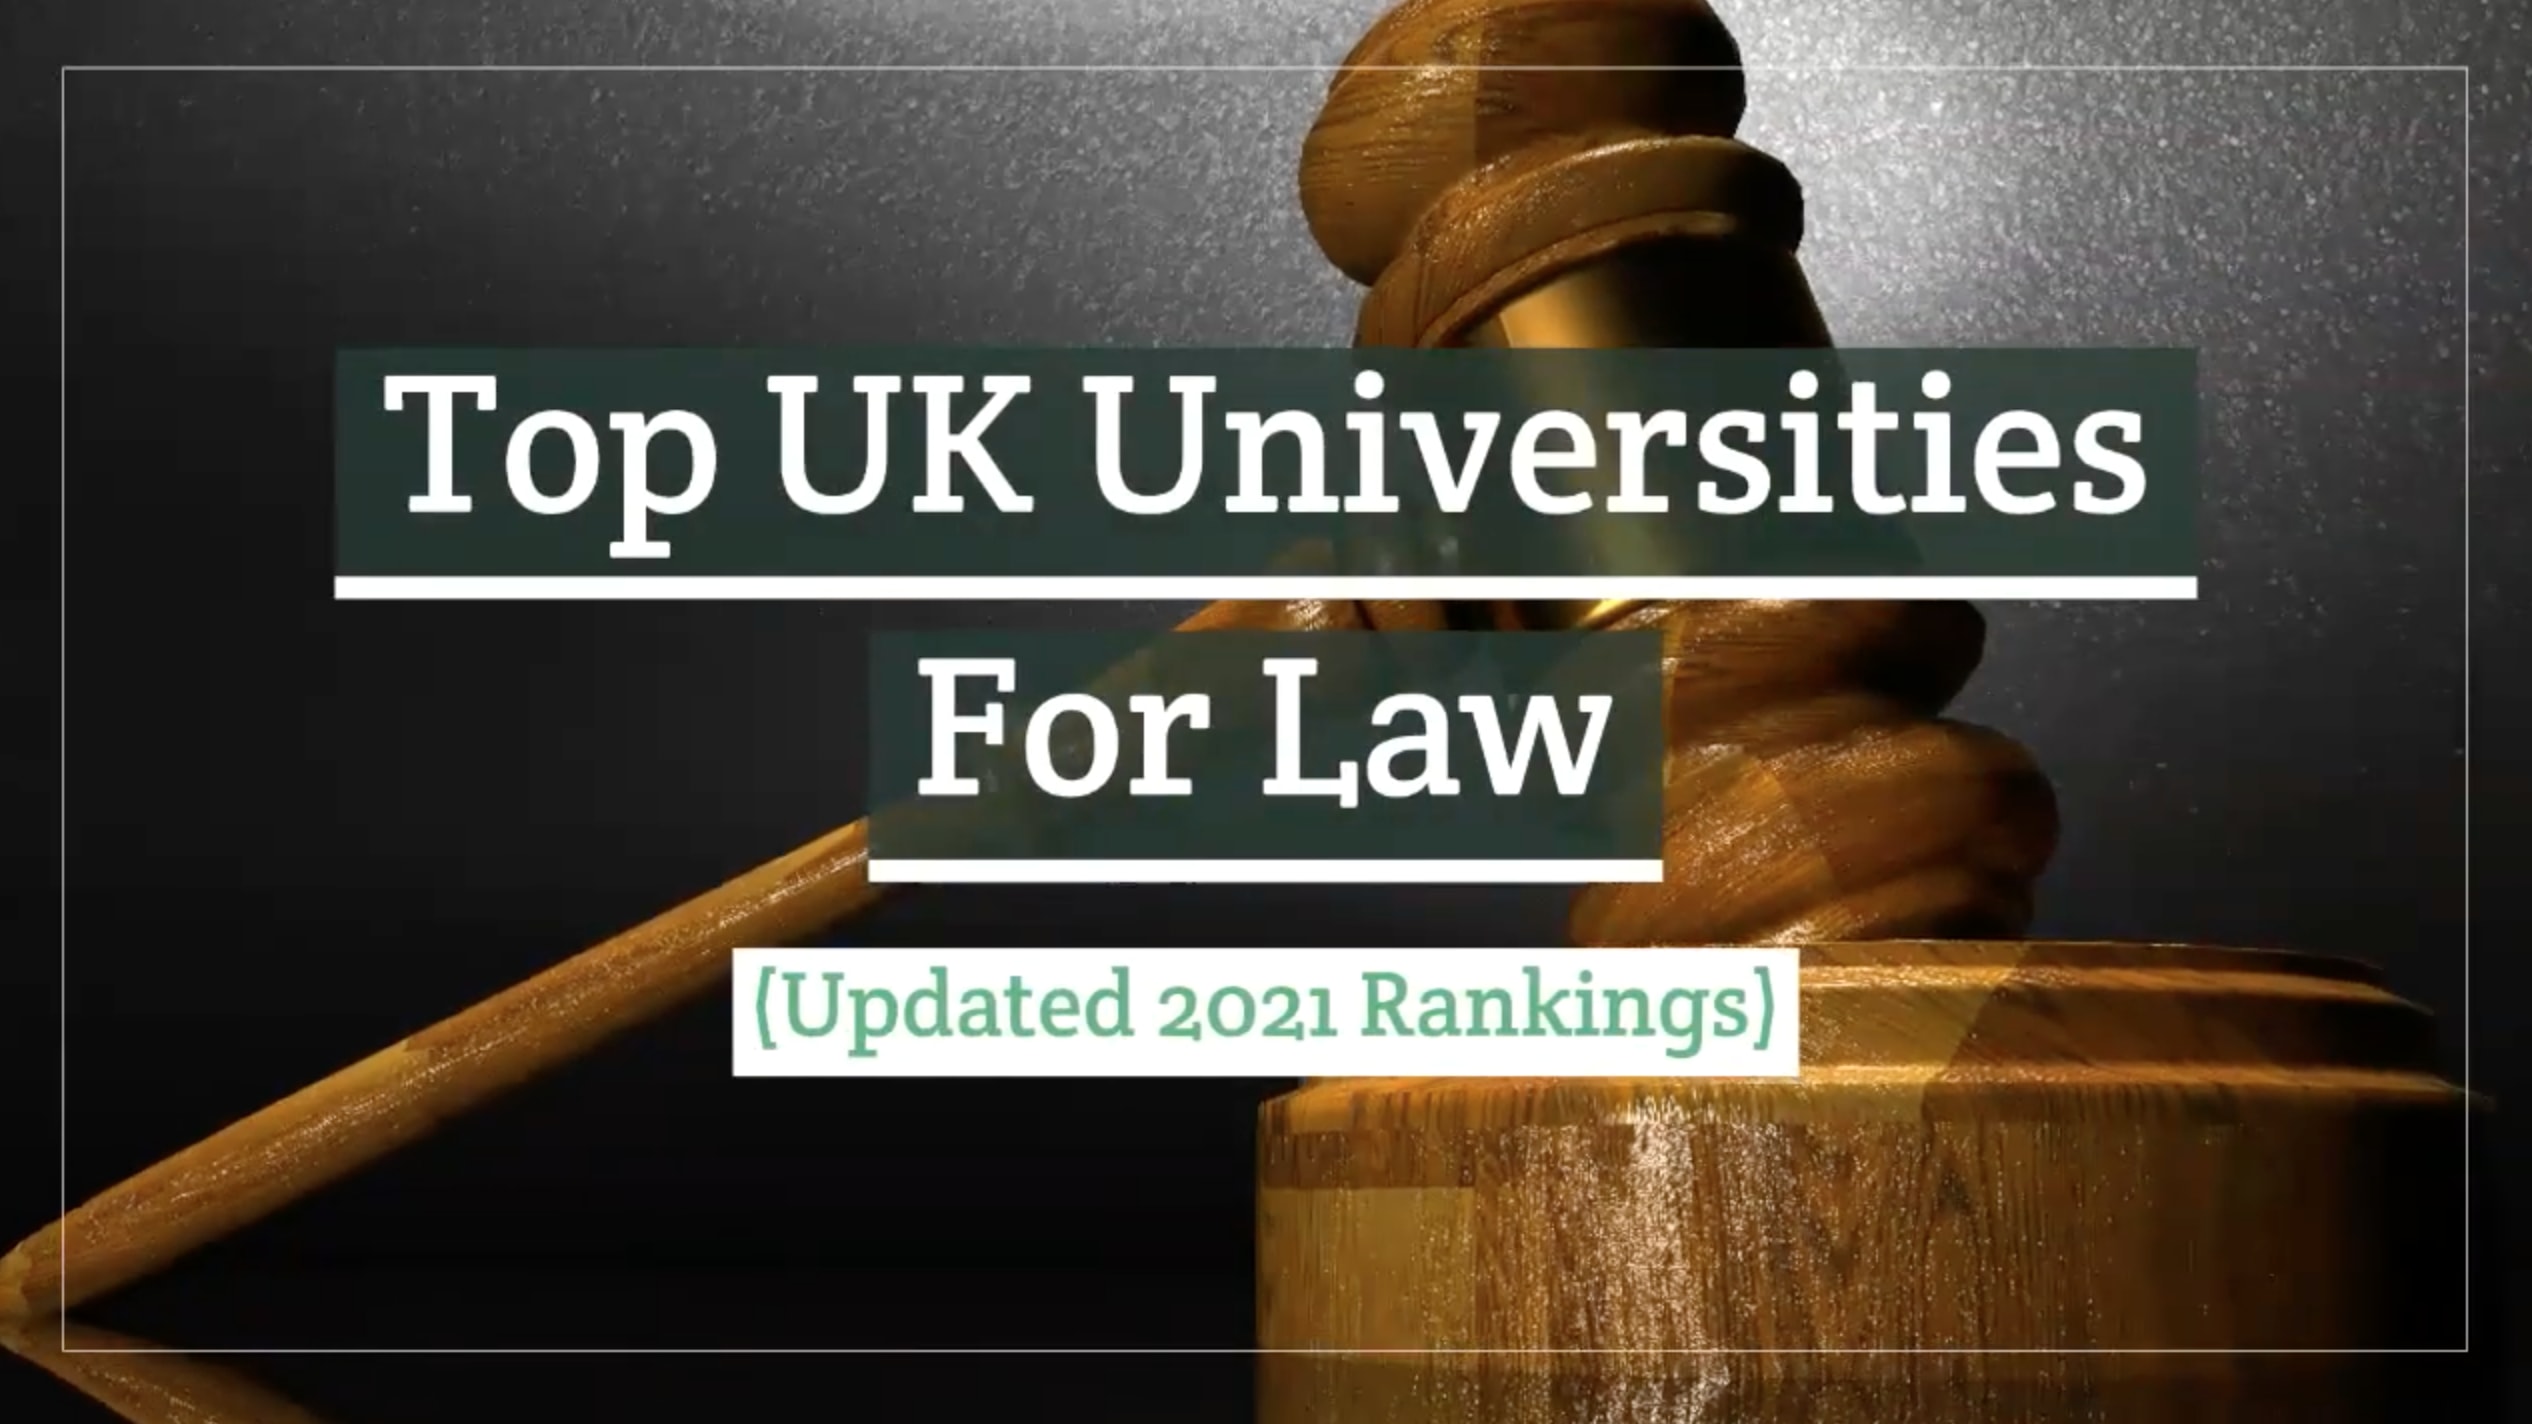 A higher law. Top Universities for Law. A higher Law (2021). QS ranking Durham University.